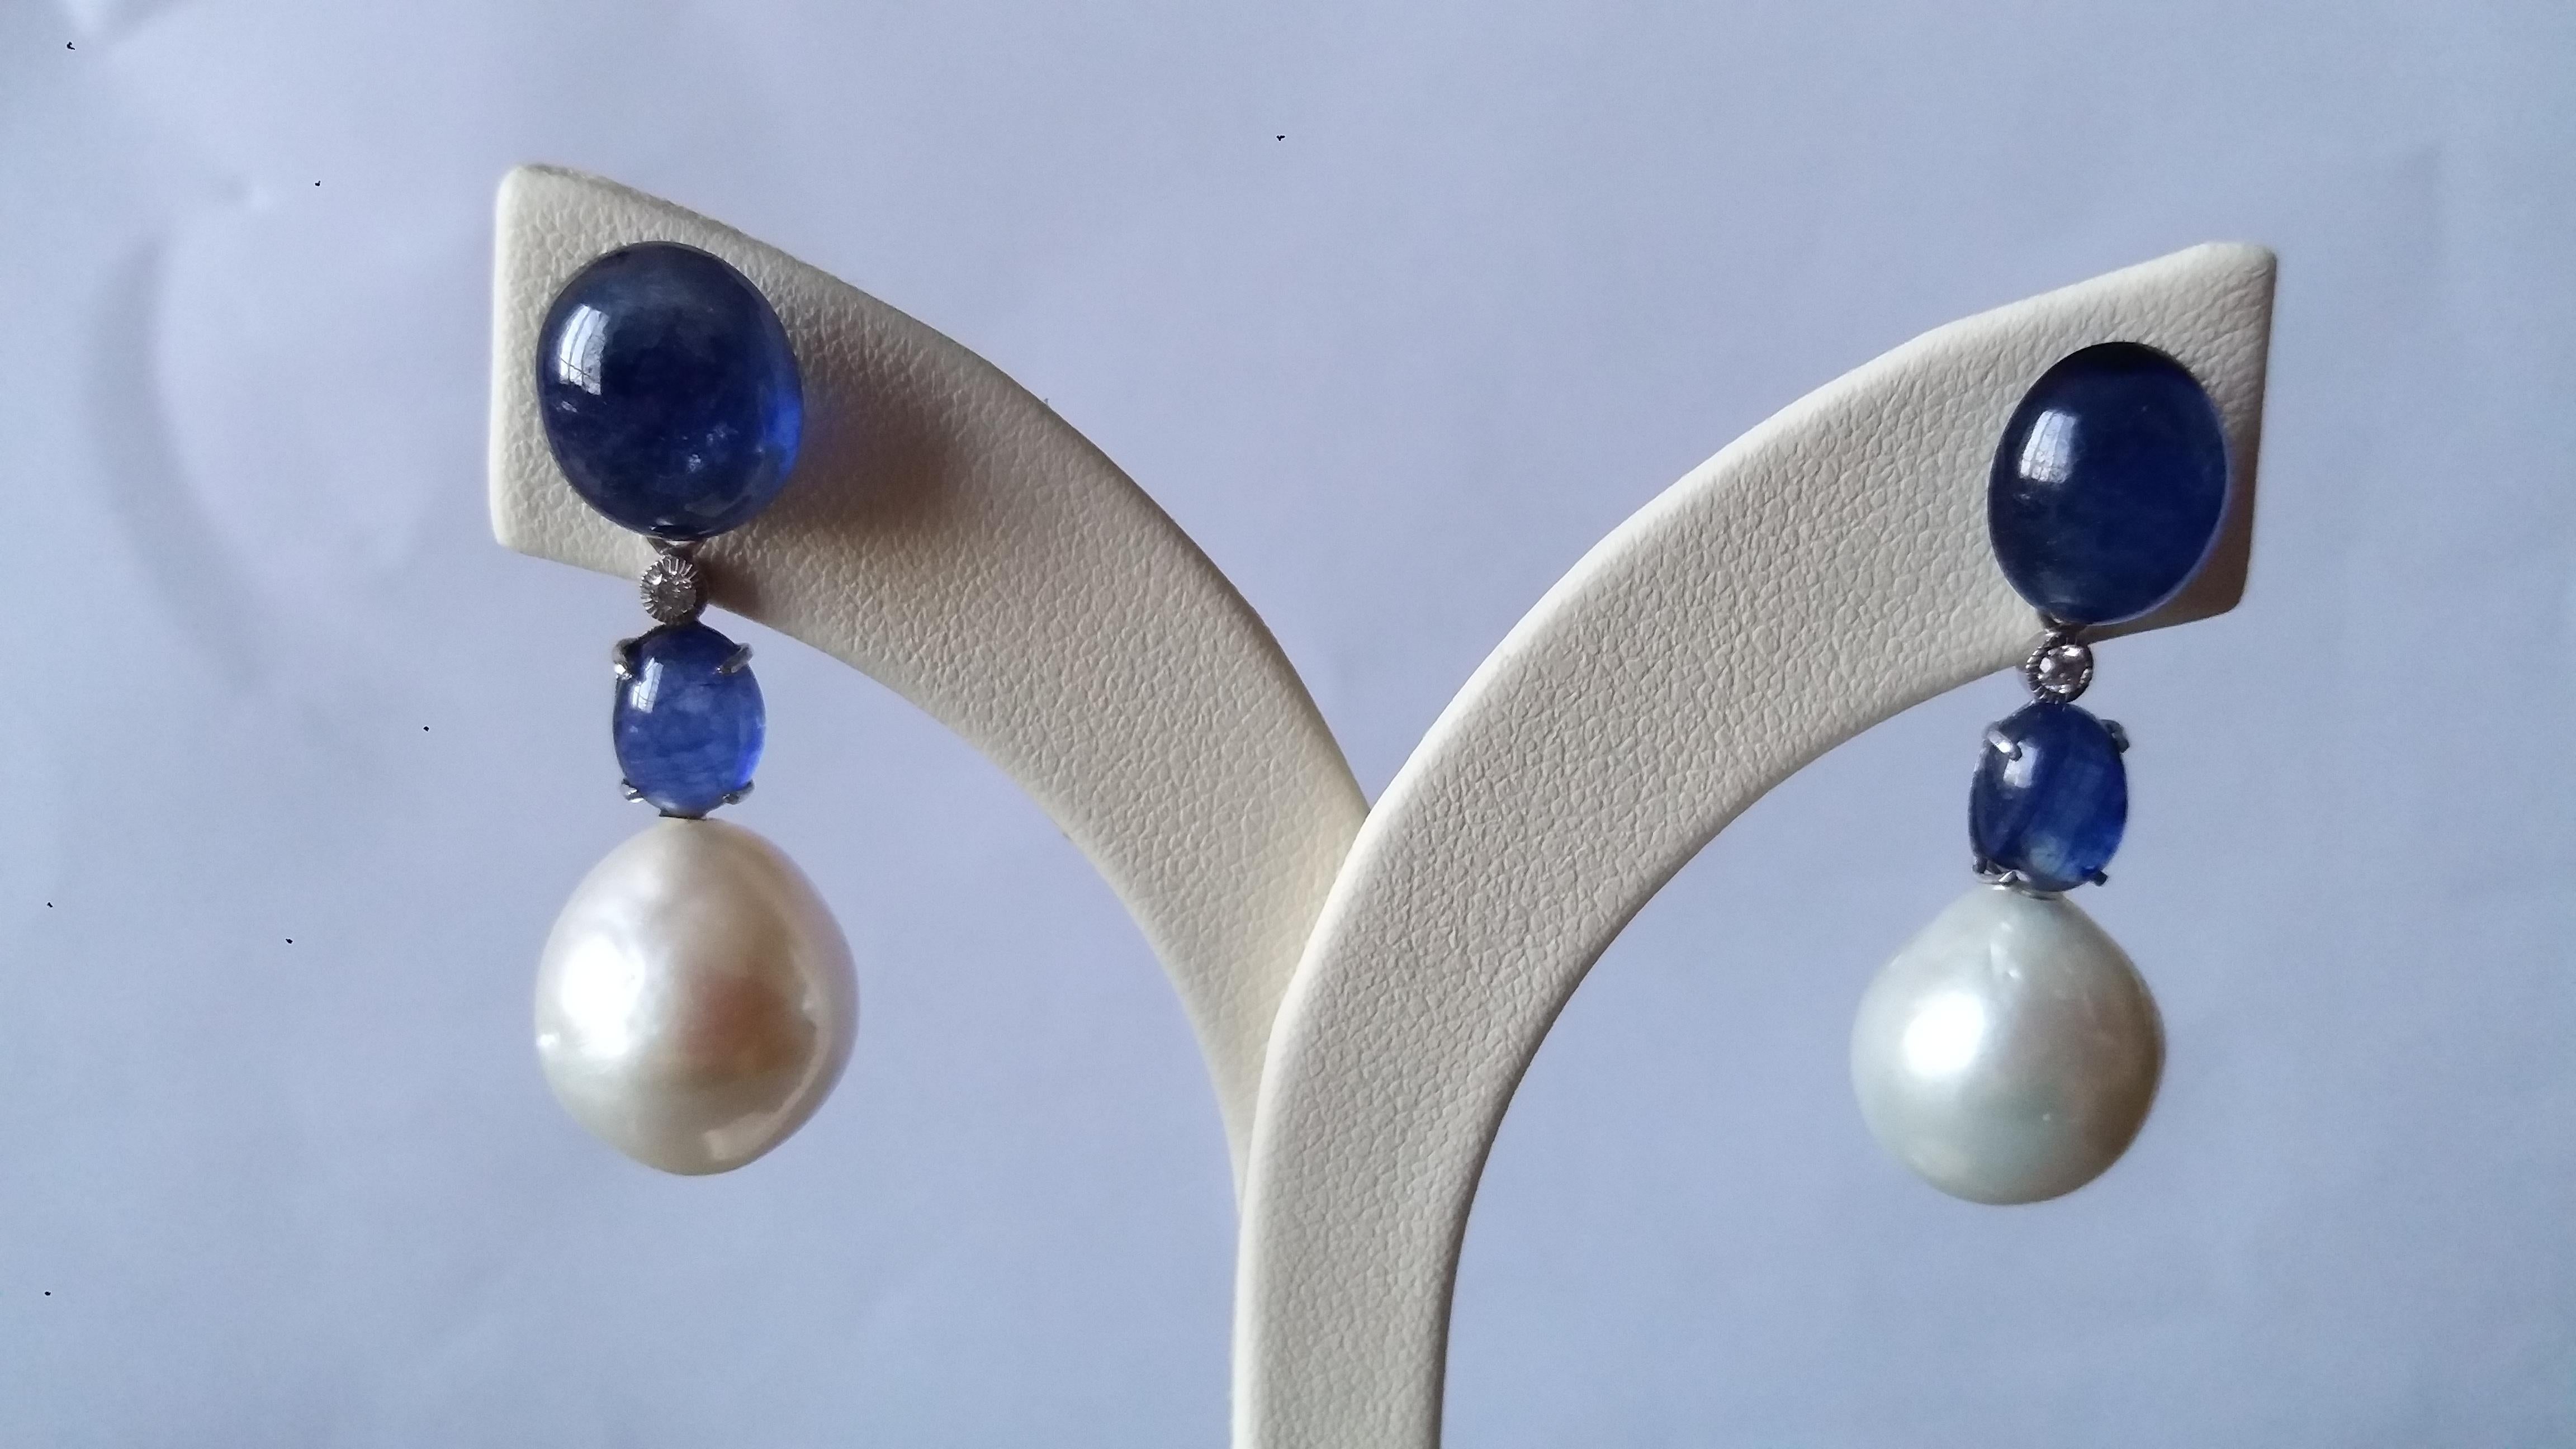 2 Blue Sapphire Ovals cabs tops,middle parts with 2 Blue Sapphire smaller oval cabs,2 round full cut 0,05 cts each, diamonds,2 Pearls about 13 mm size each

Length 35 mm
Width 13 mm
Weight 10 grams
In 1978 our workshop started in Italy to make